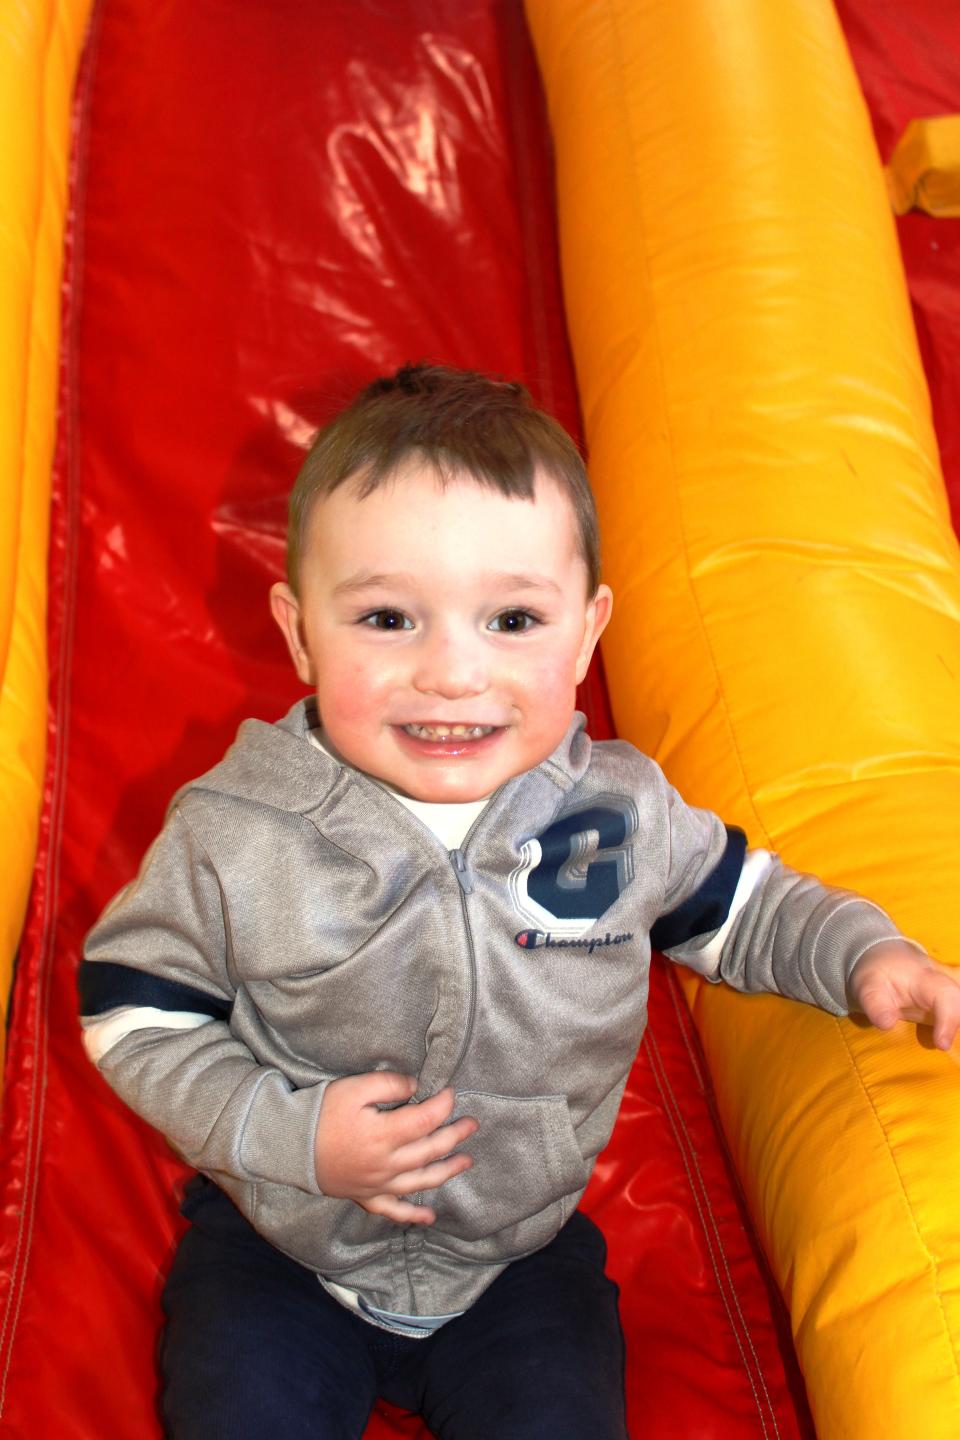 A child on a red and yellow inflatable slide